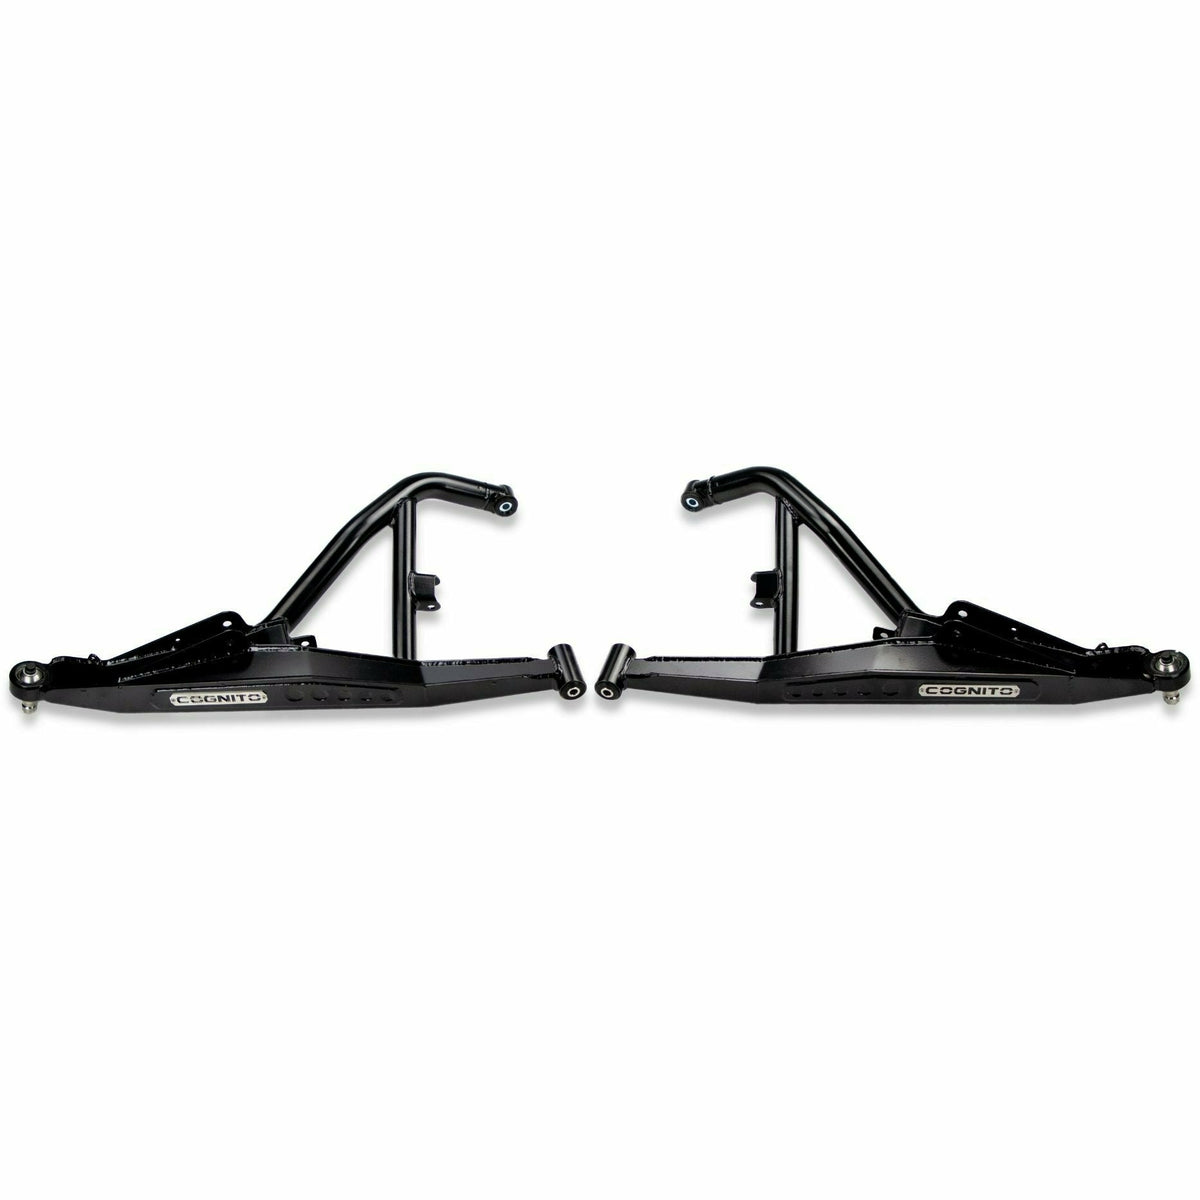 Cognito Polaris RZR XP 1000/Turbo Long Travel Front Upper Control Arms